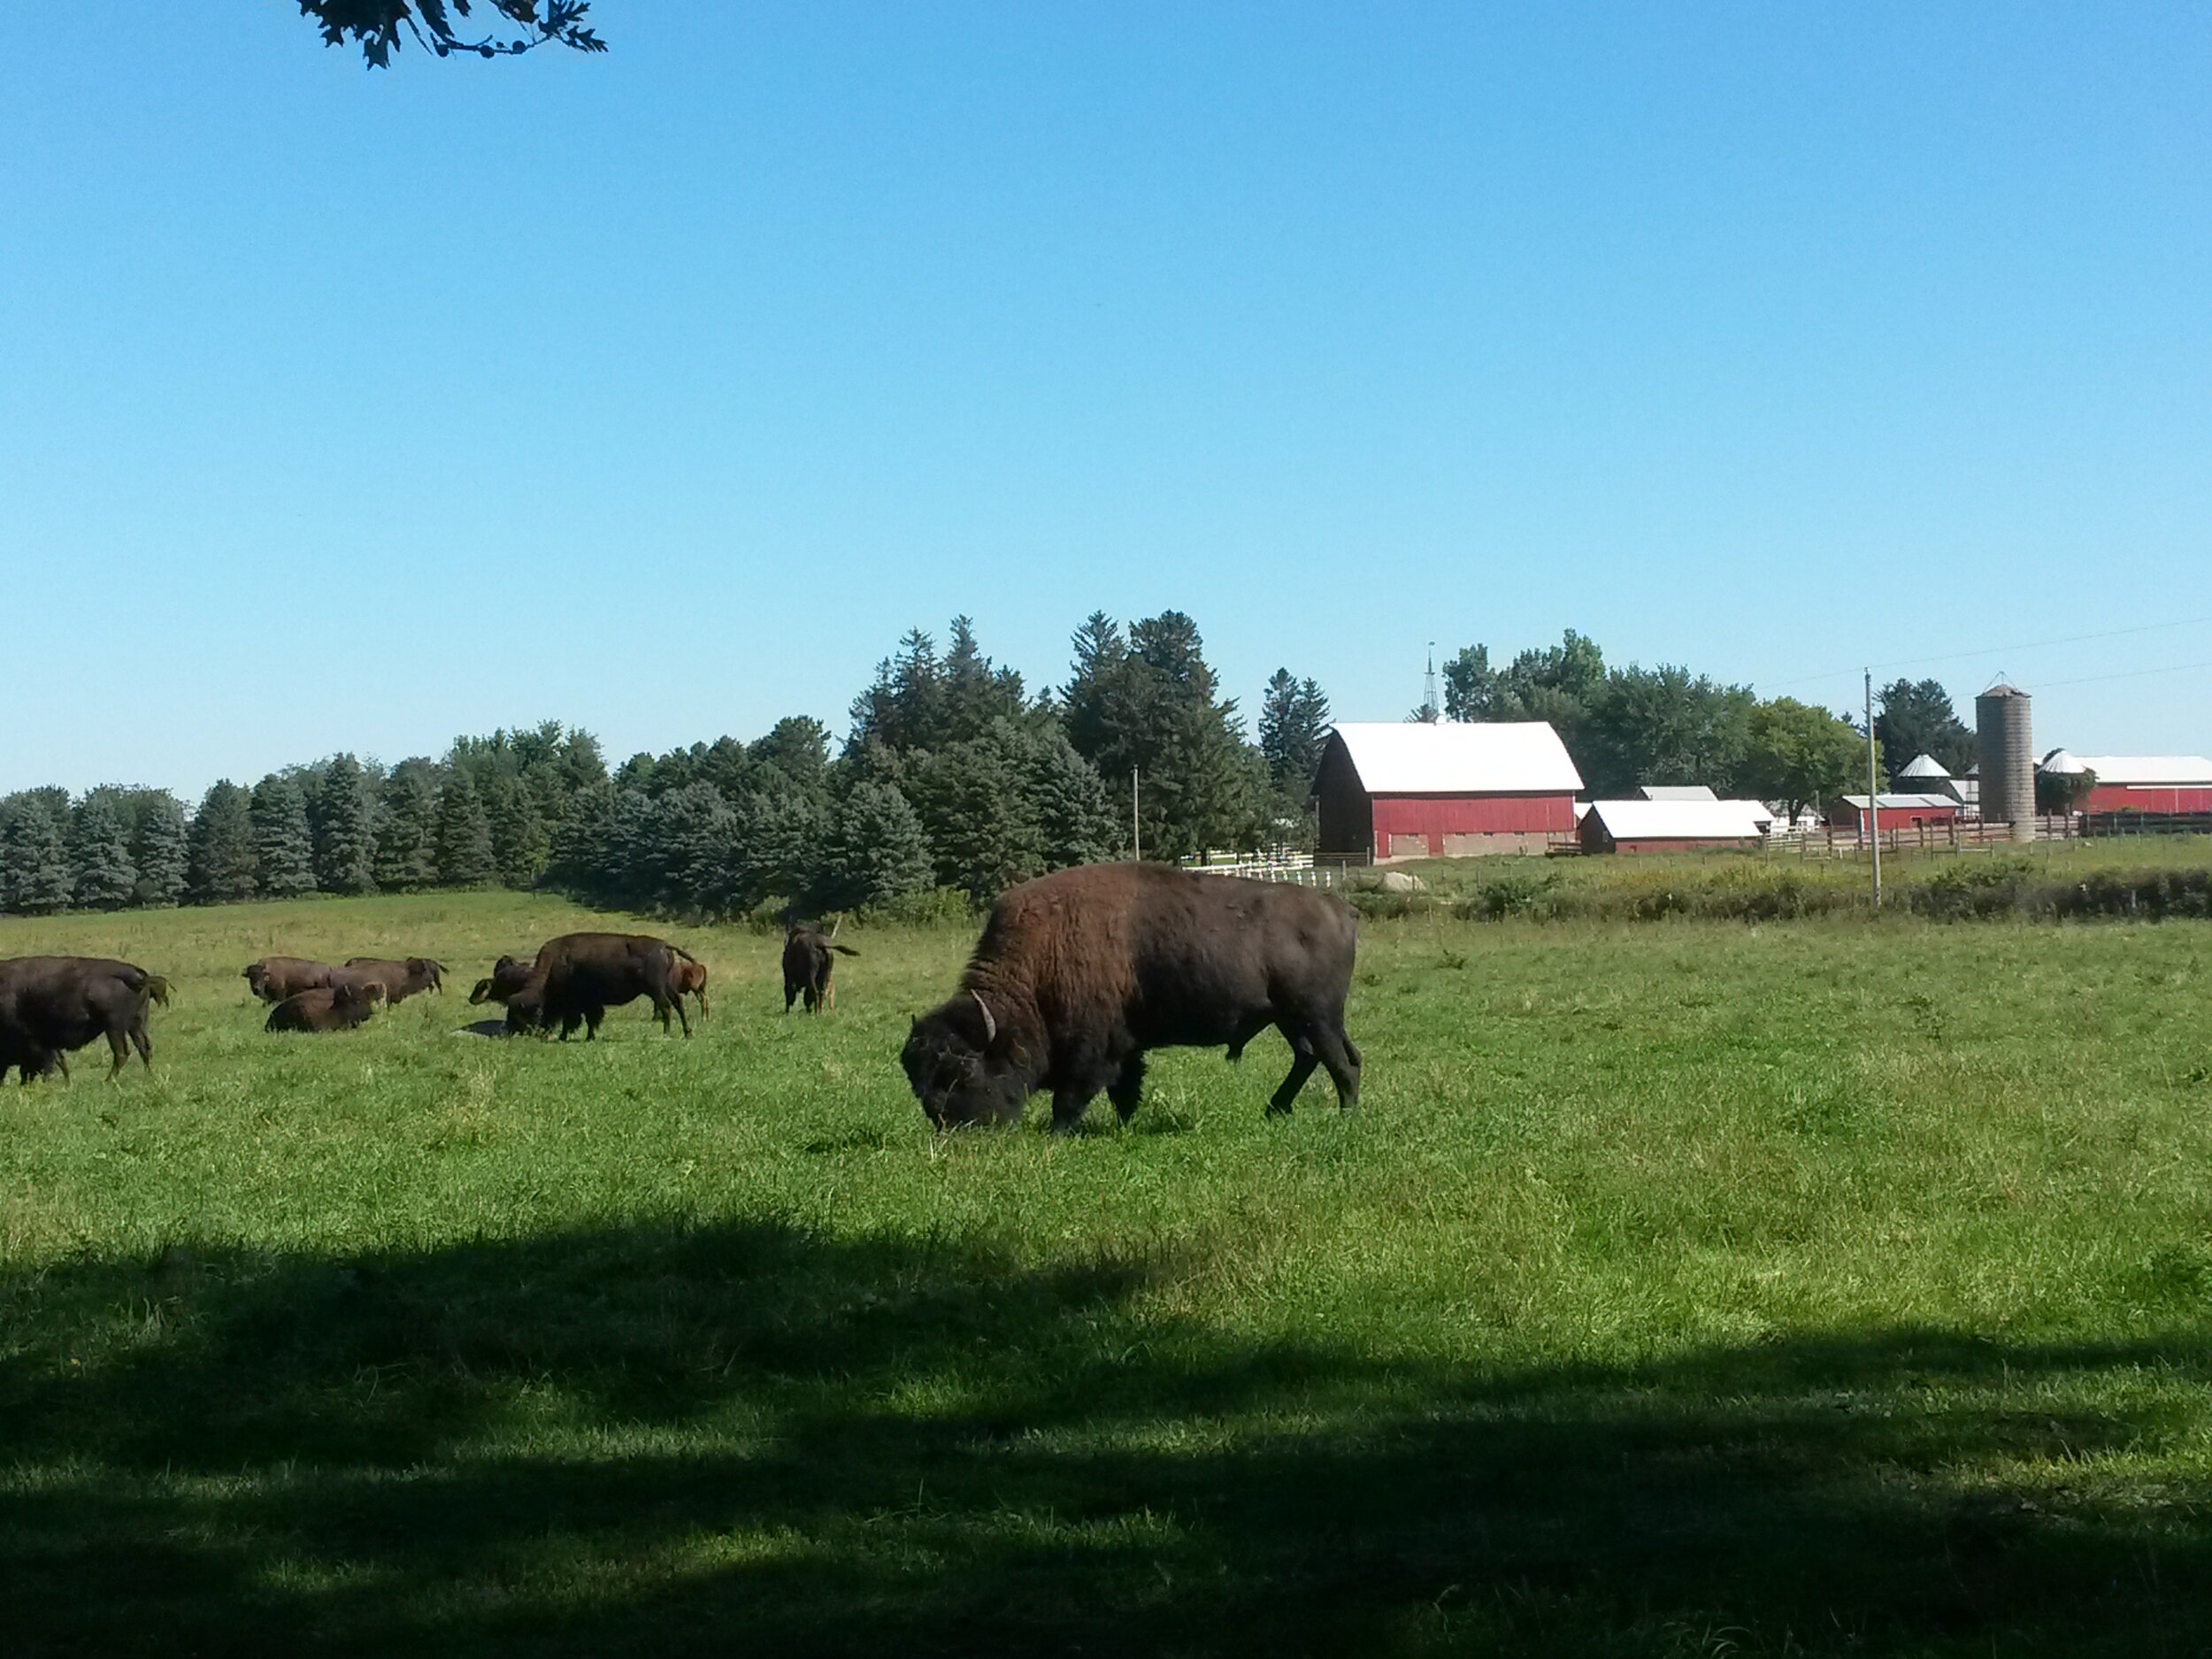 Open field of bison in front of barns